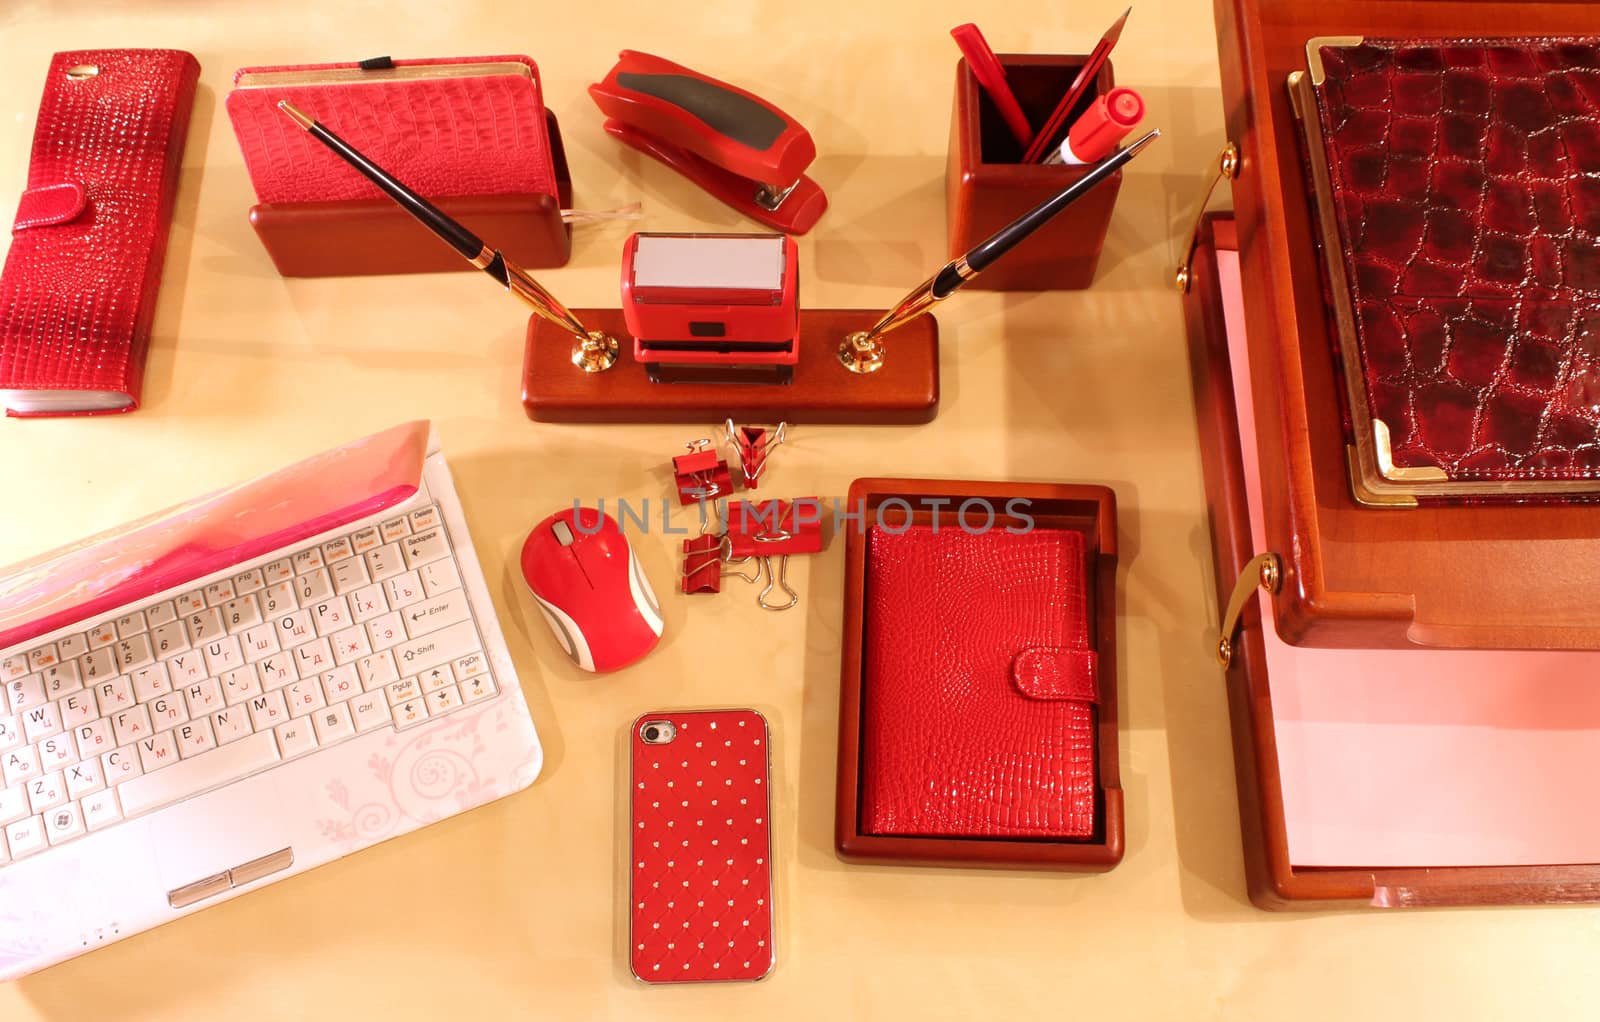 Computer, mobile phone, paper tray and stationery in red color scheme